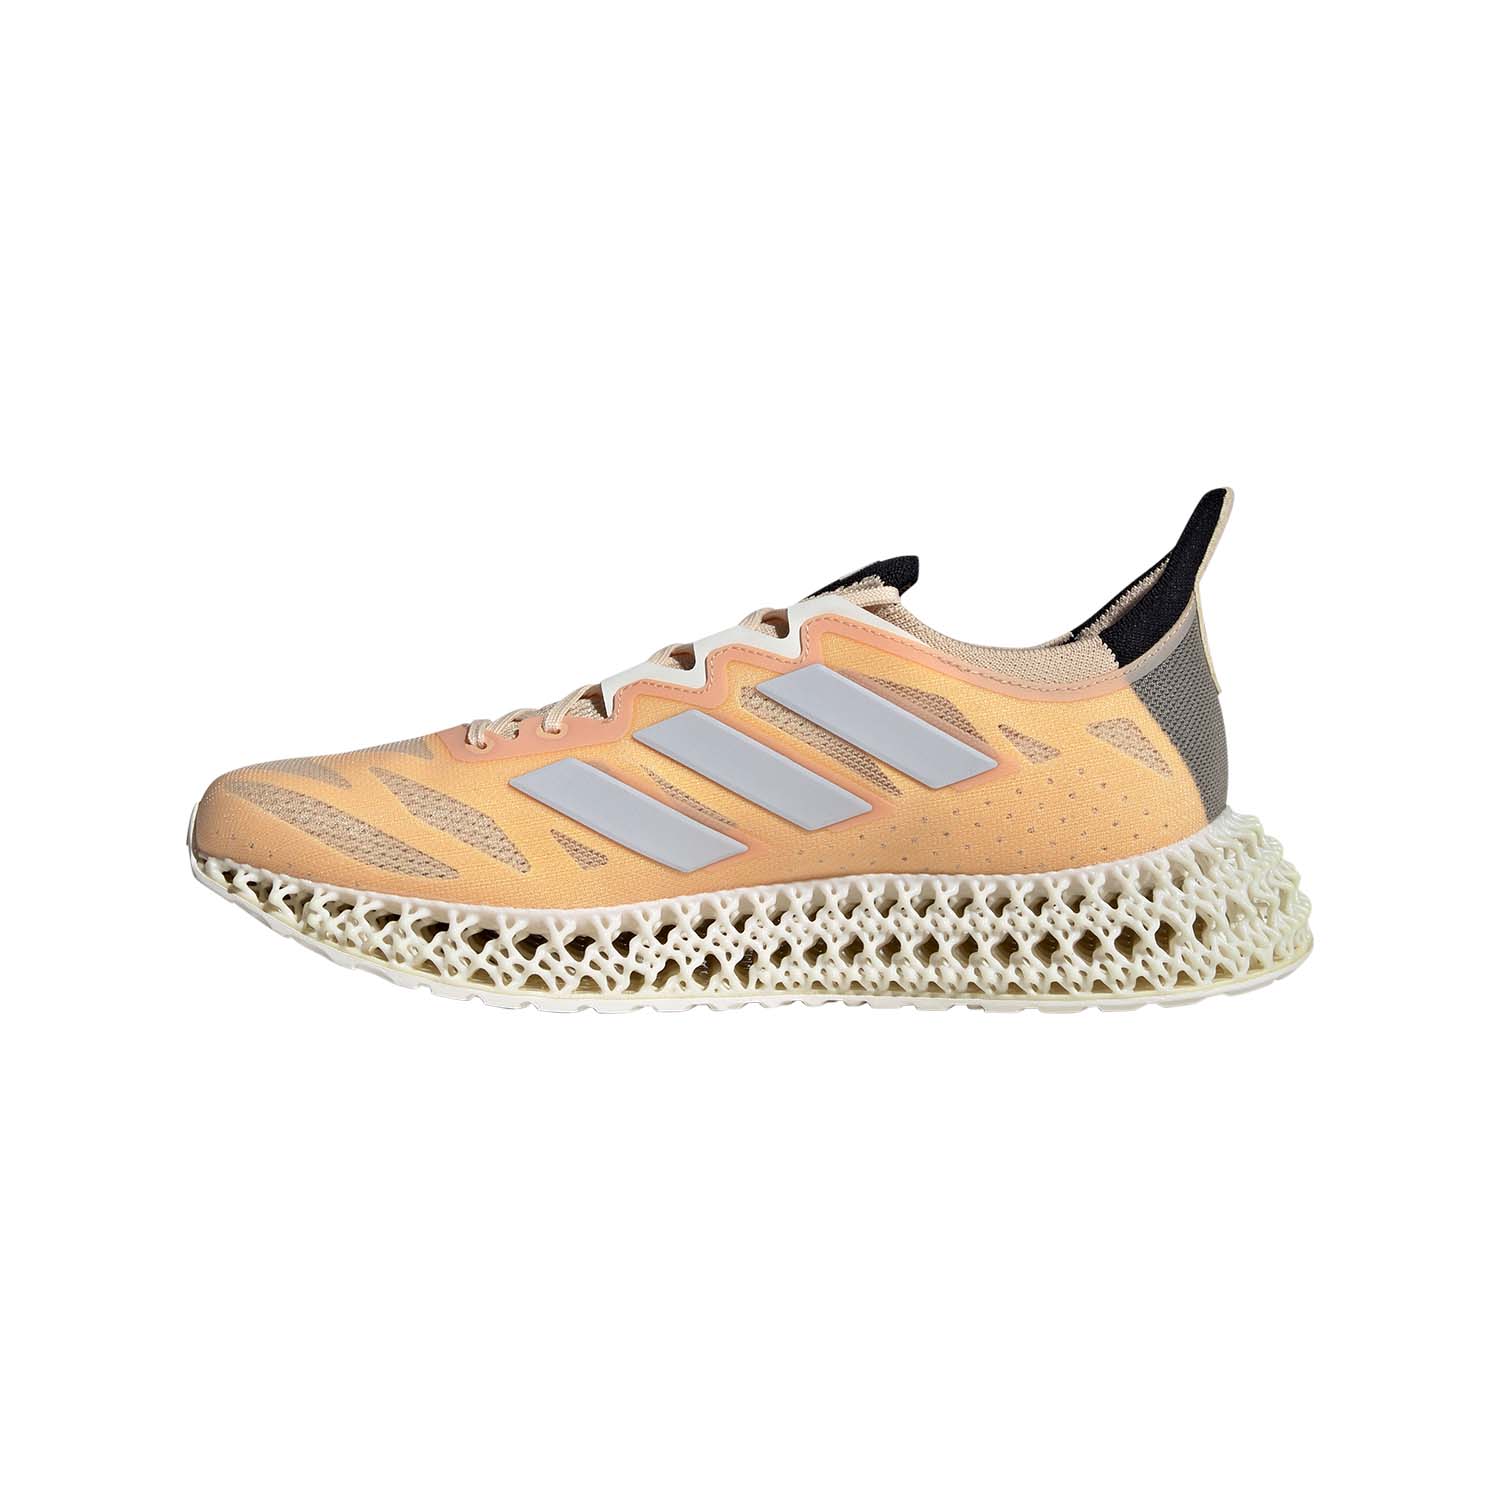 adidas 4DFWD 3 - Crystal Sand/Cloud White/Off White